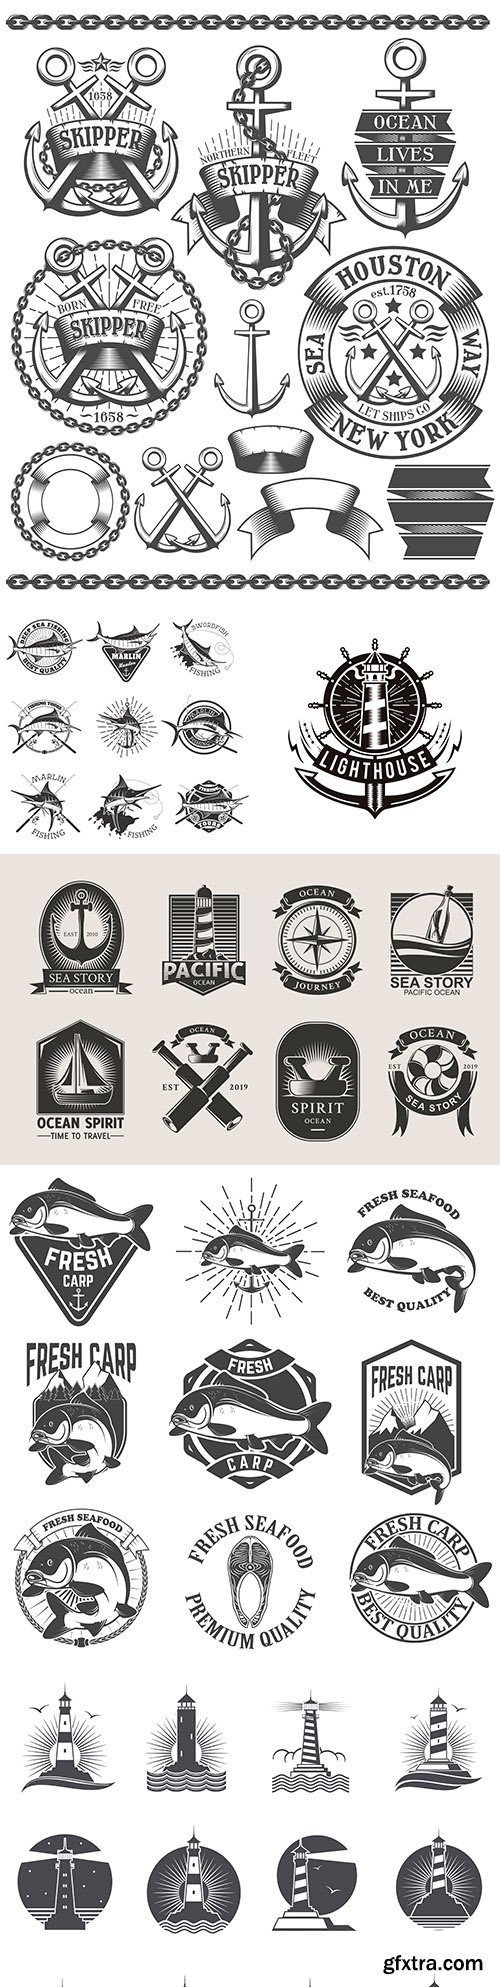 Marine anchor set of labels and design logos